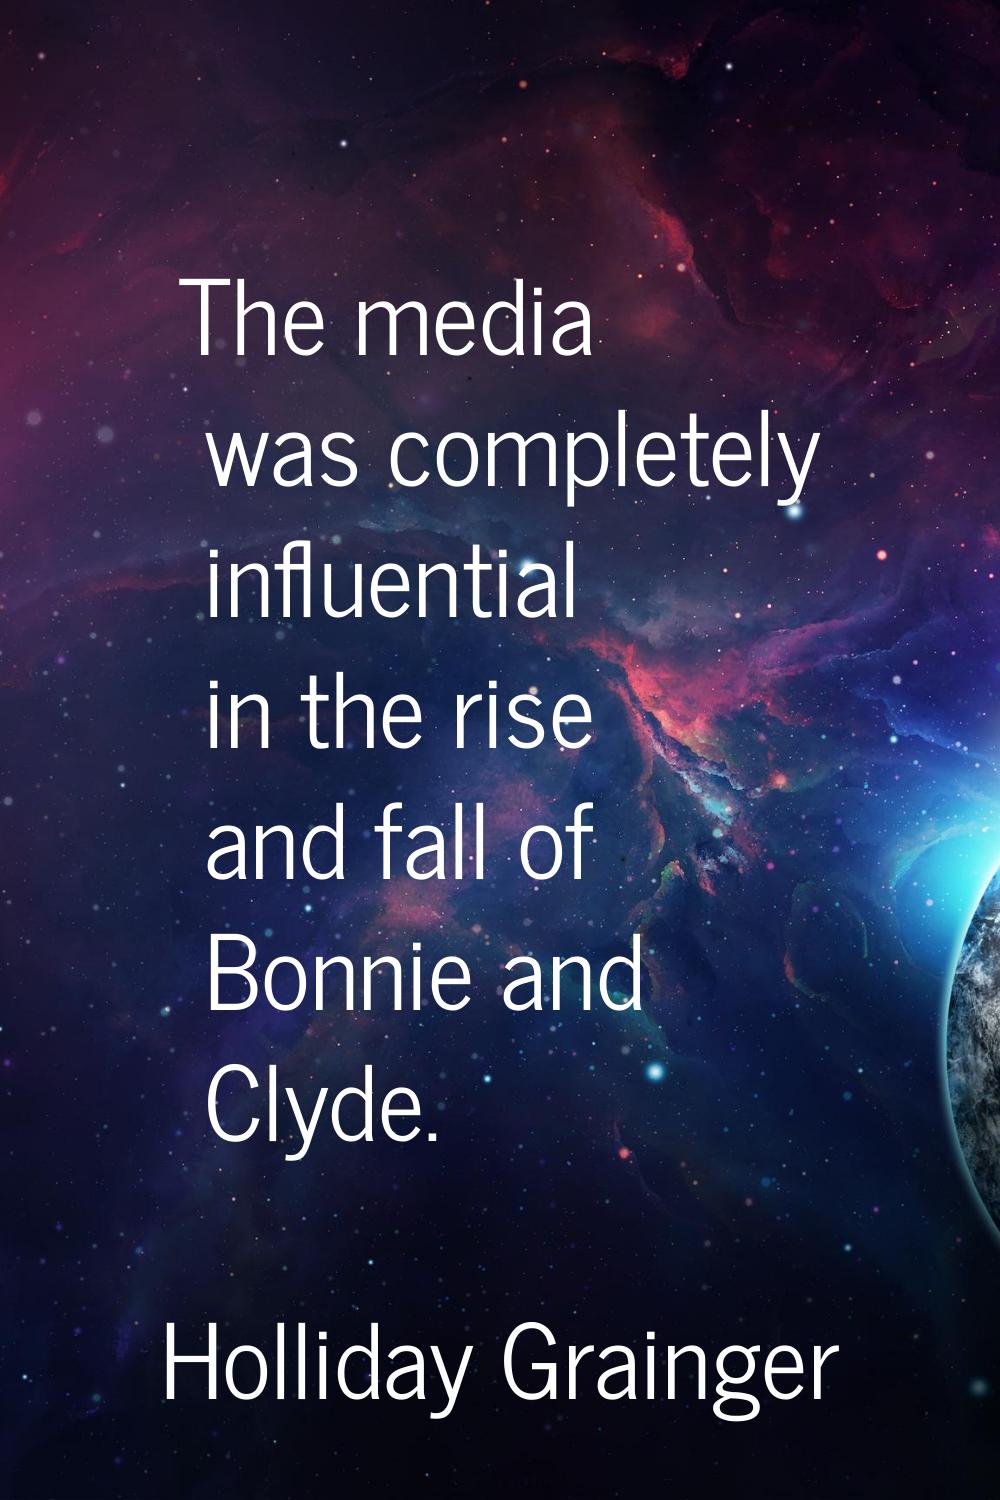 The media was completely influential in the rise and fall of Bonnie and Clyde.